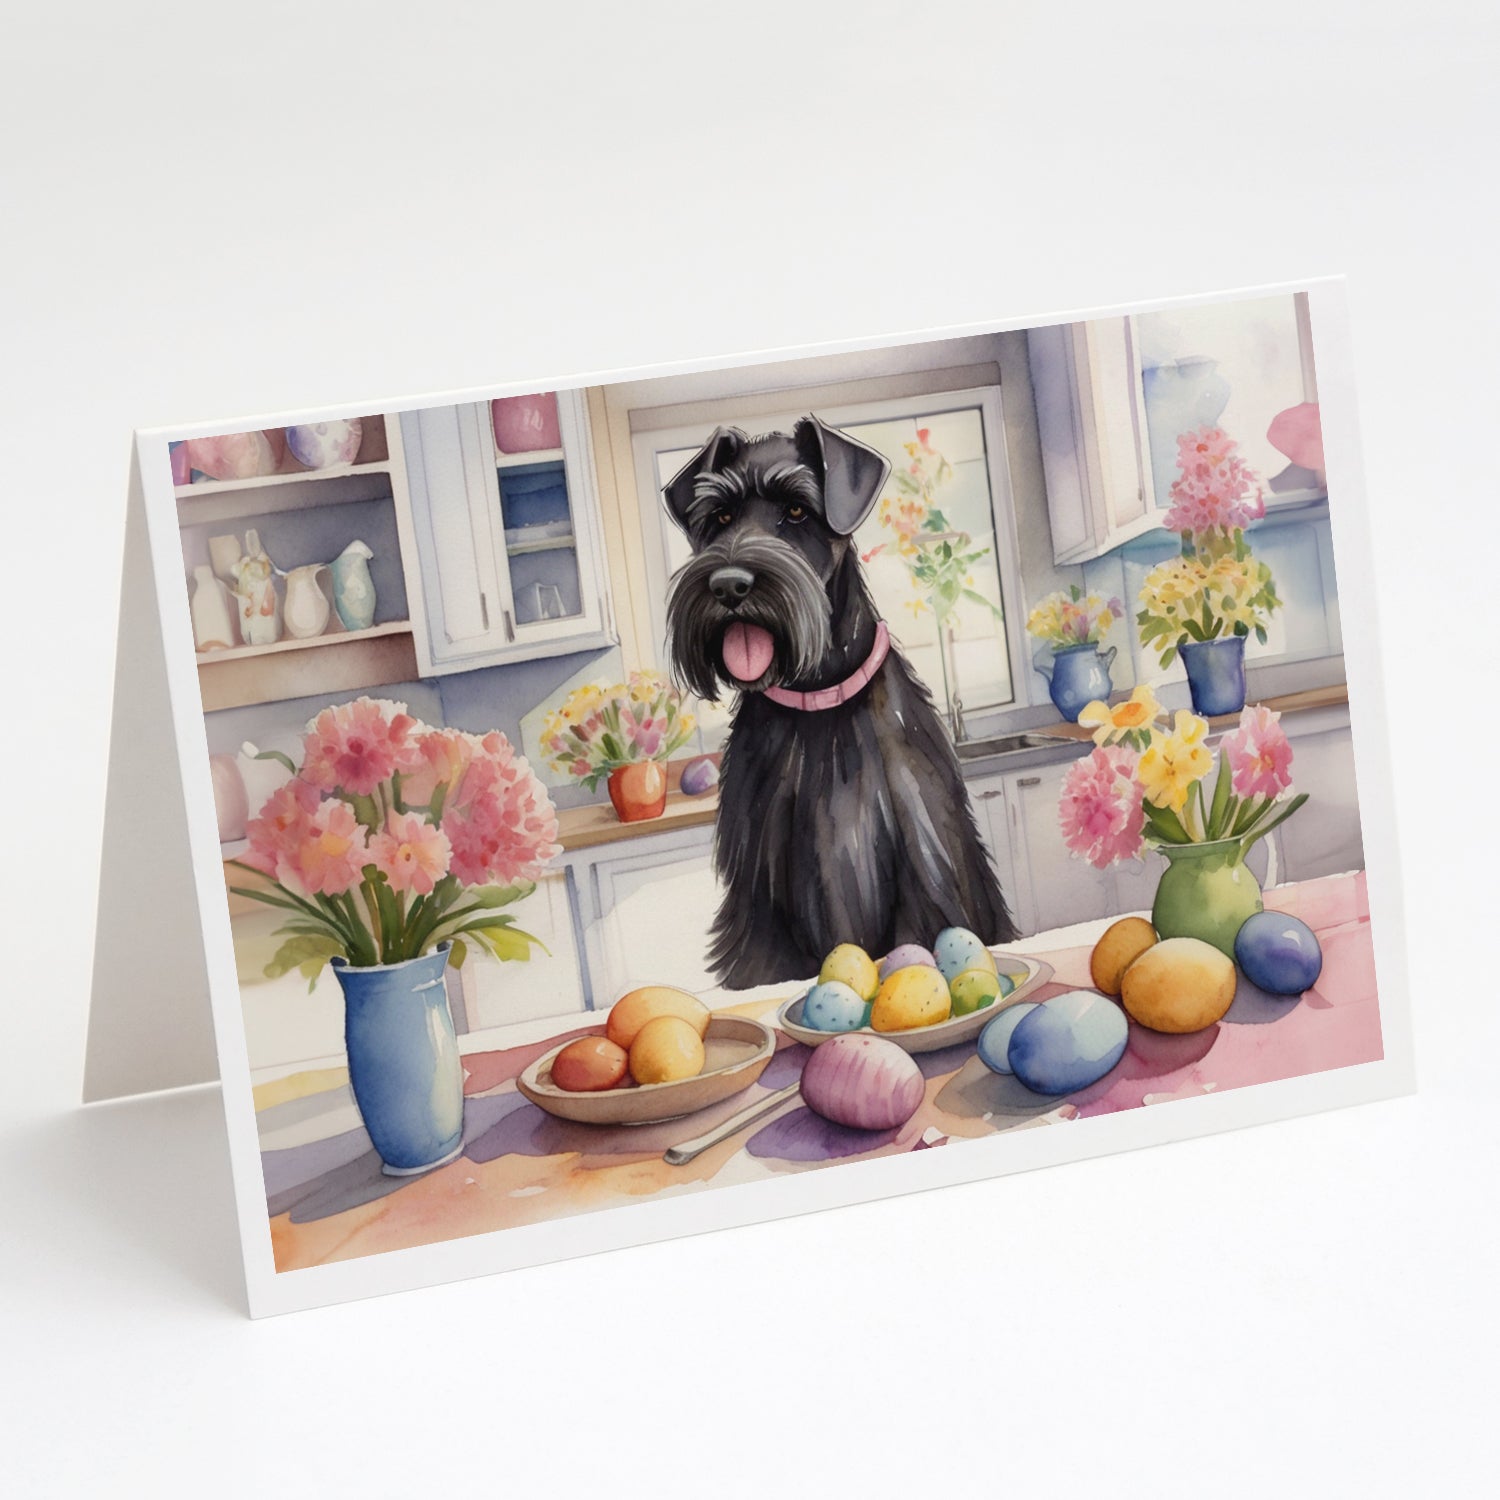 Buy this Decorating Easter Giant Schnauzer Greeting Cards Pack of 8